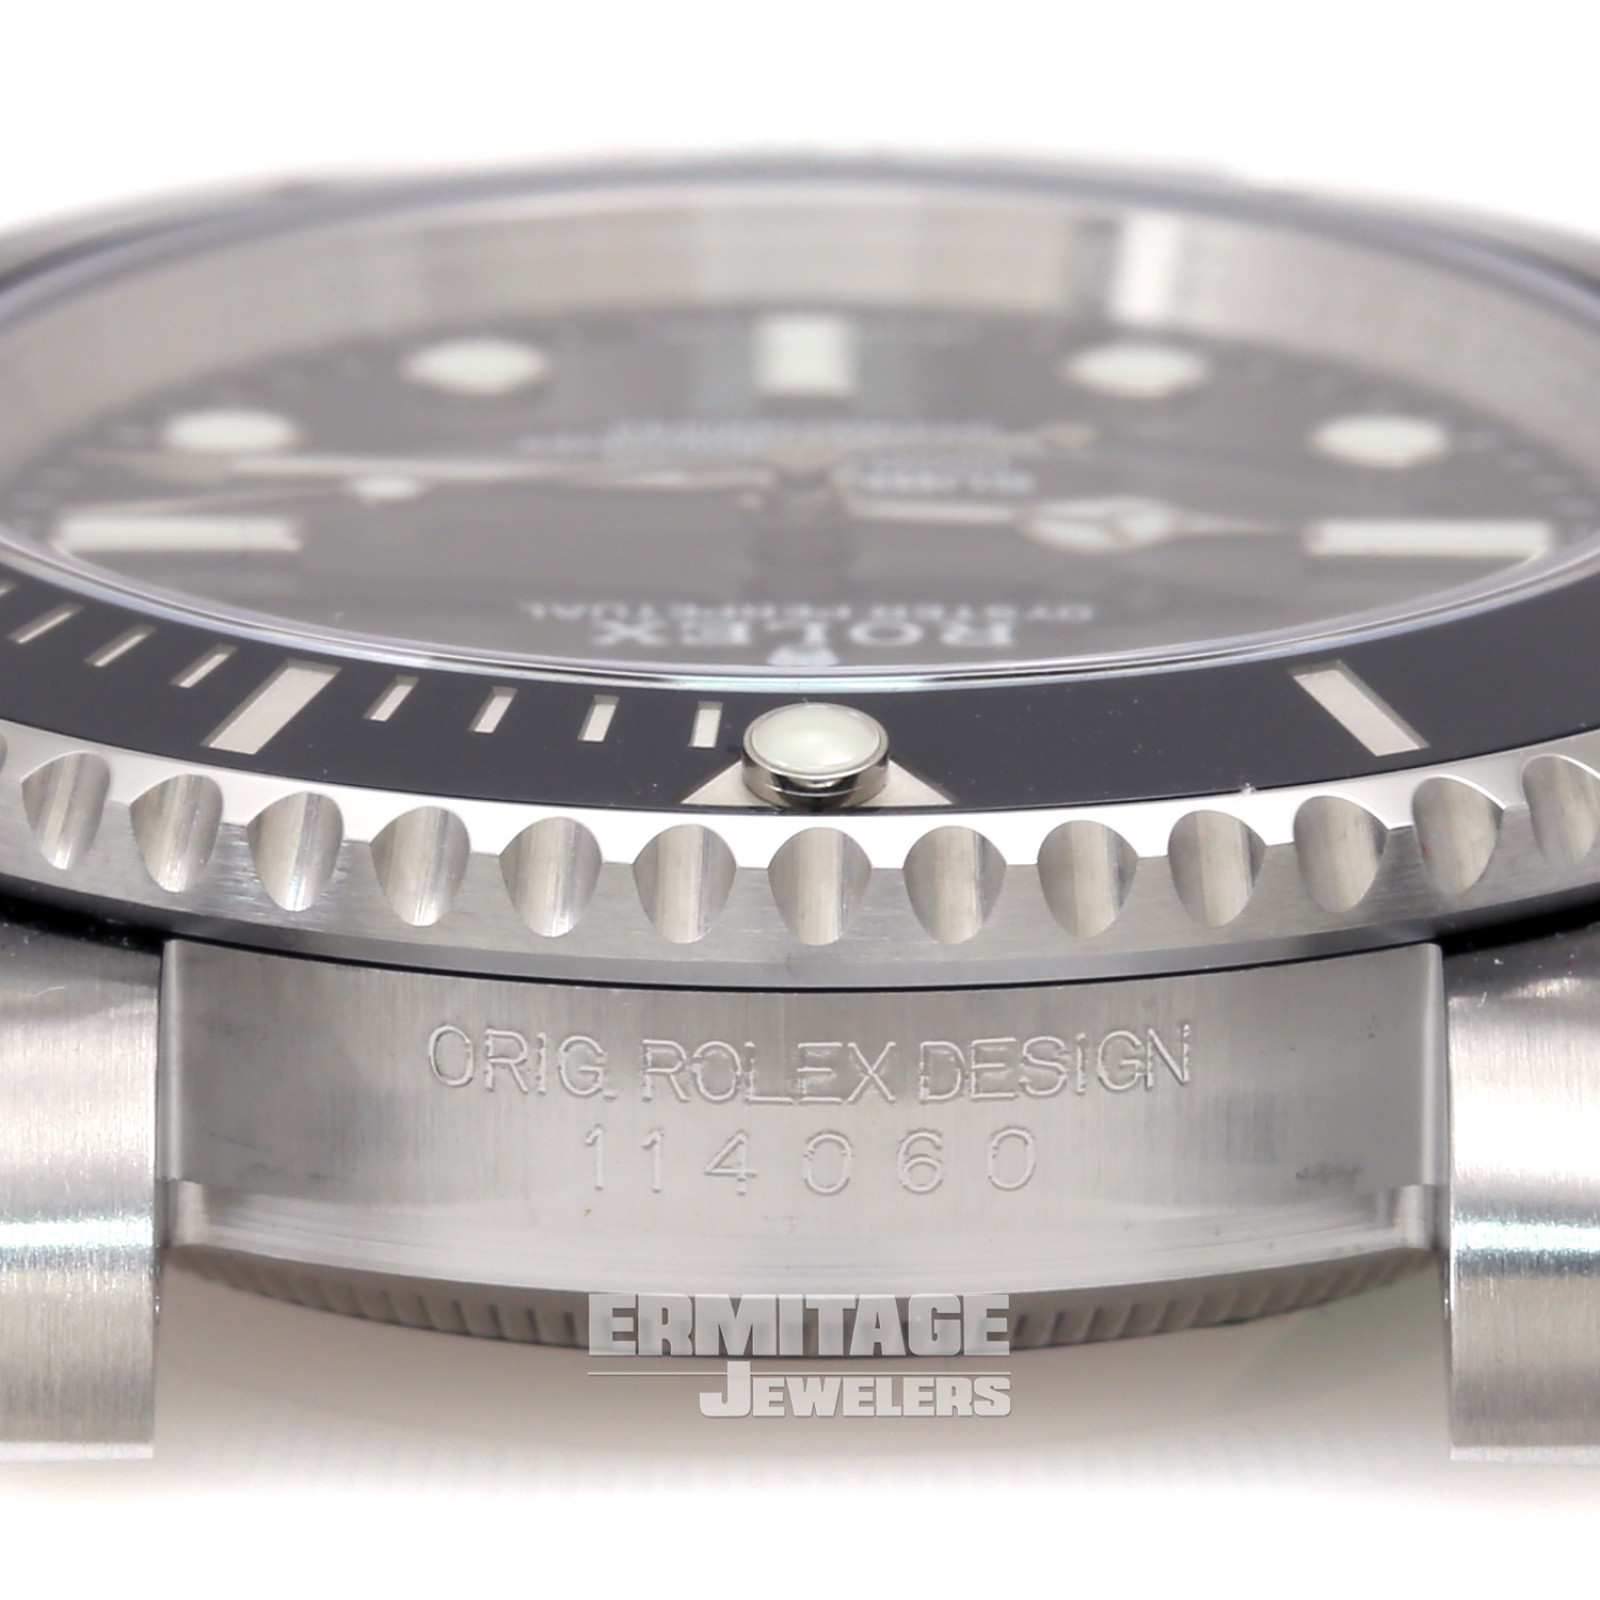 Steel on Oyster Non- Date Rolex Submariner 114060 40 mm